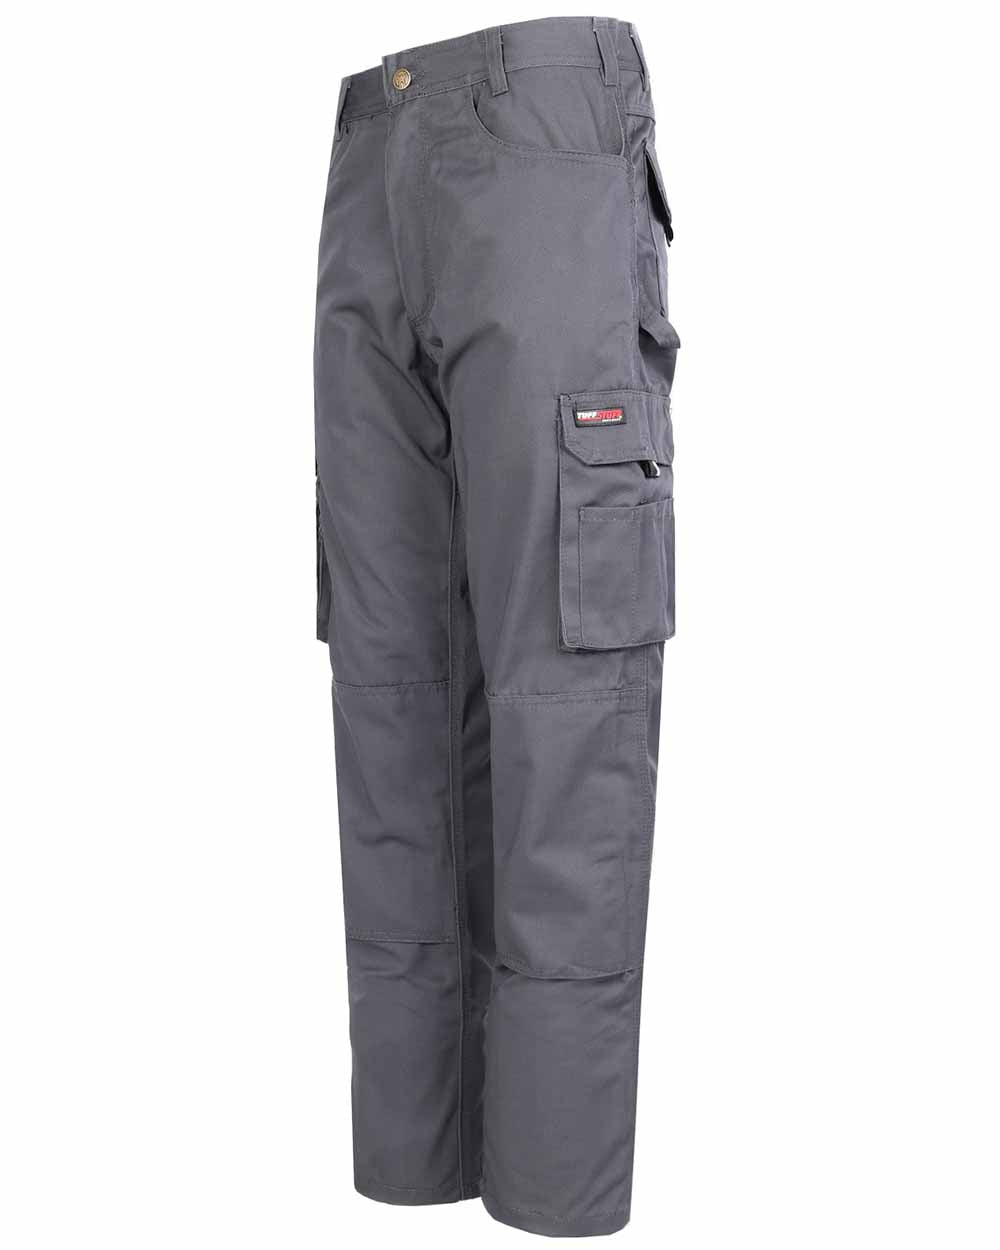 Side view with holster pockets TuffStuff Pro Work Trousers in Grey  